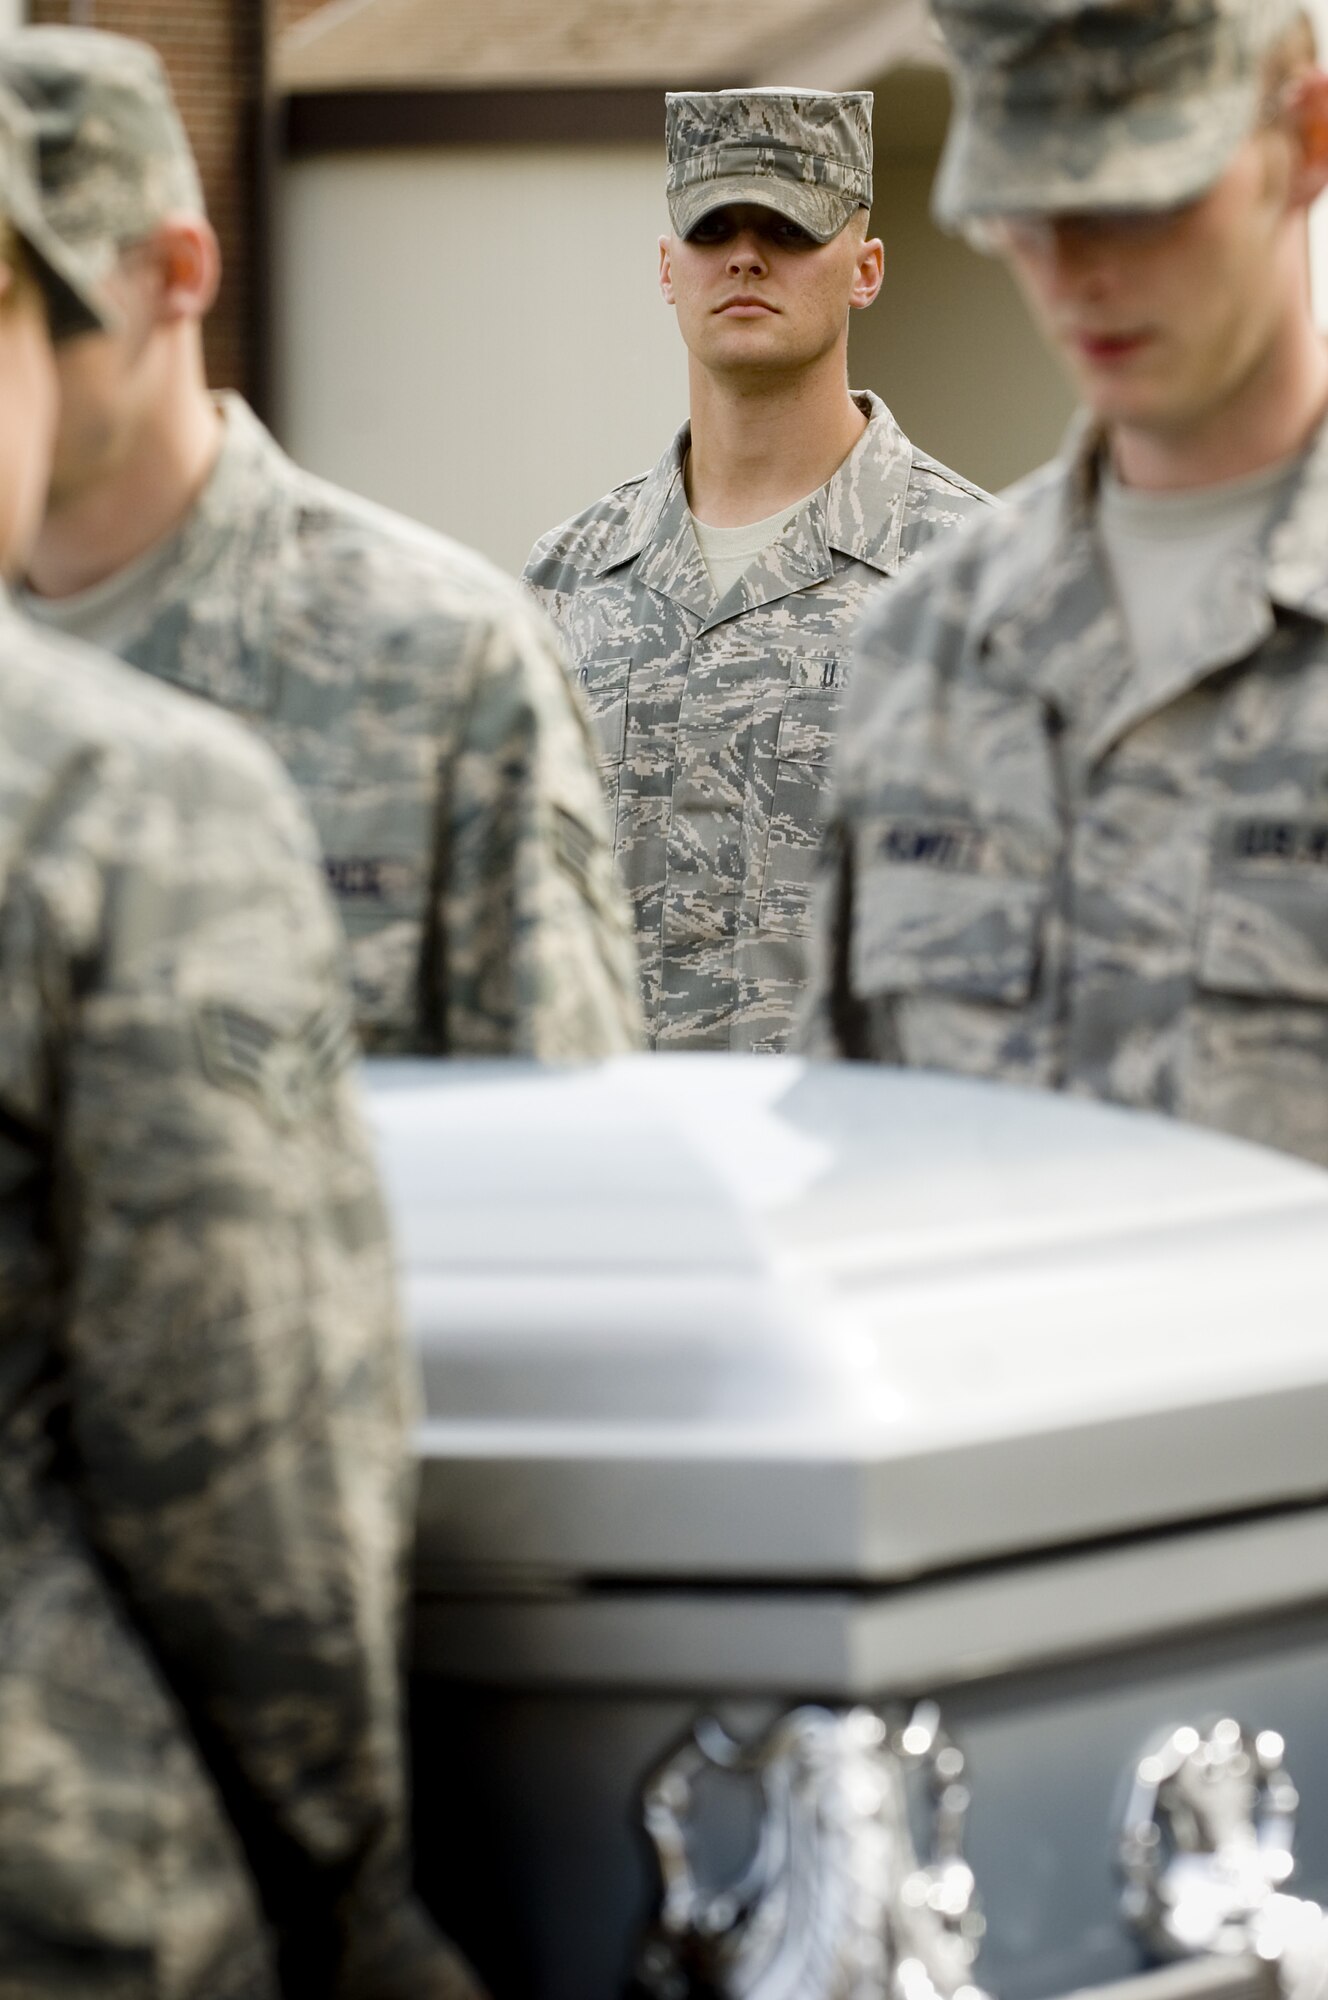 Staff Sgt. Alex Frizzo, U.S. Air Force Honor Guard formal training instructor, center, looks on as base honor guardsmen practice proper casket-carrying techniques during a recent visit to McChord Air Force Base, Washington. (Photo courtesy of U.S. Air Force Honor Guard)